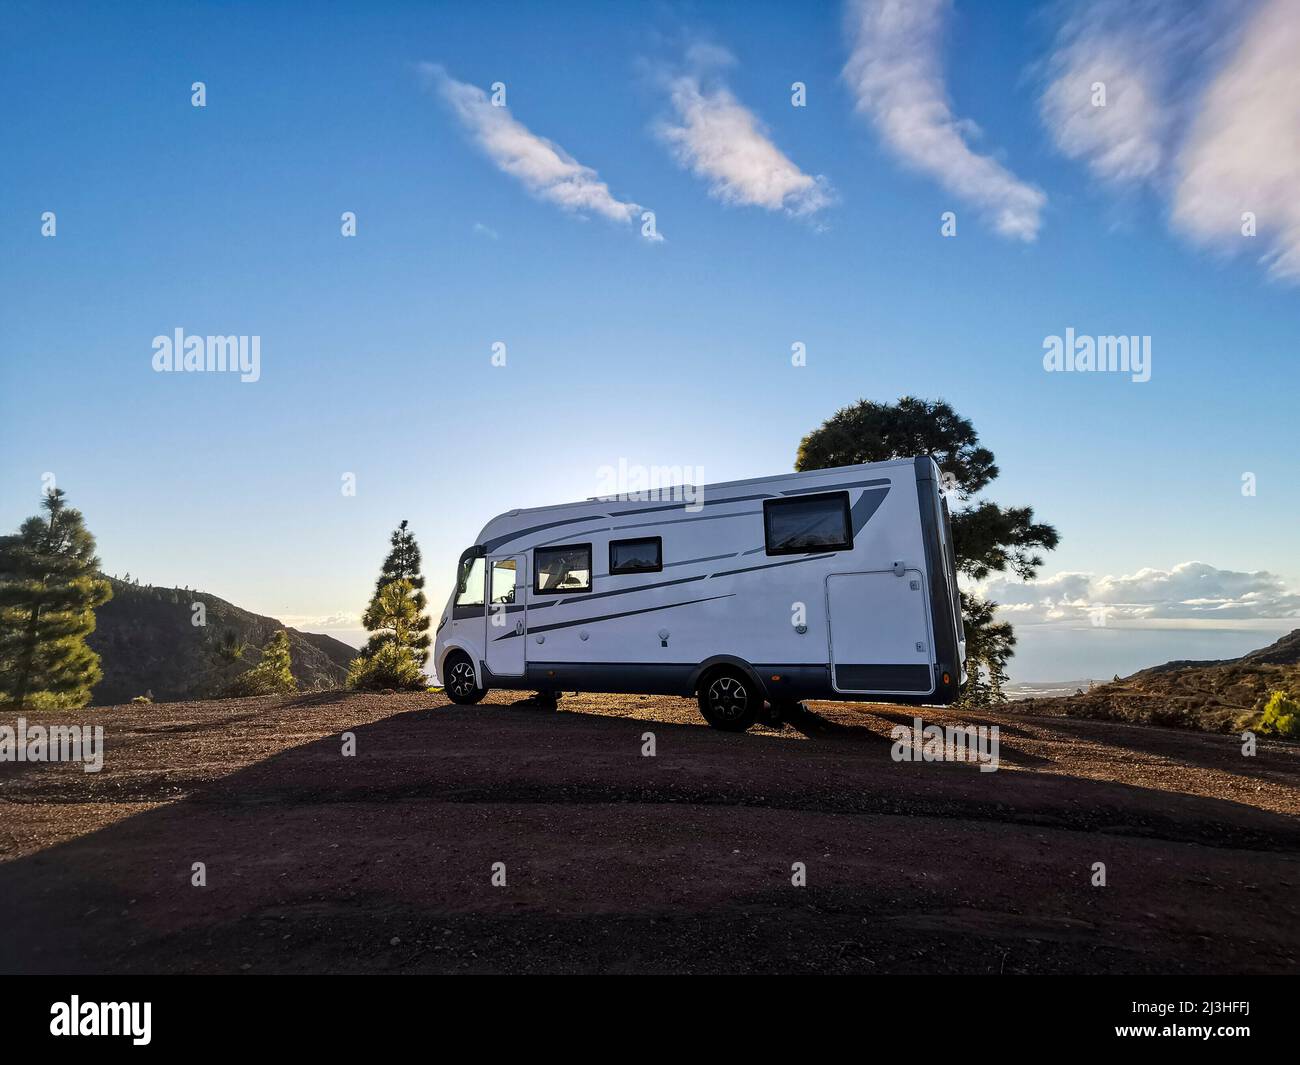 Big camper motorhome parked in off road nature space to enjoy total freedom. Stock Photo